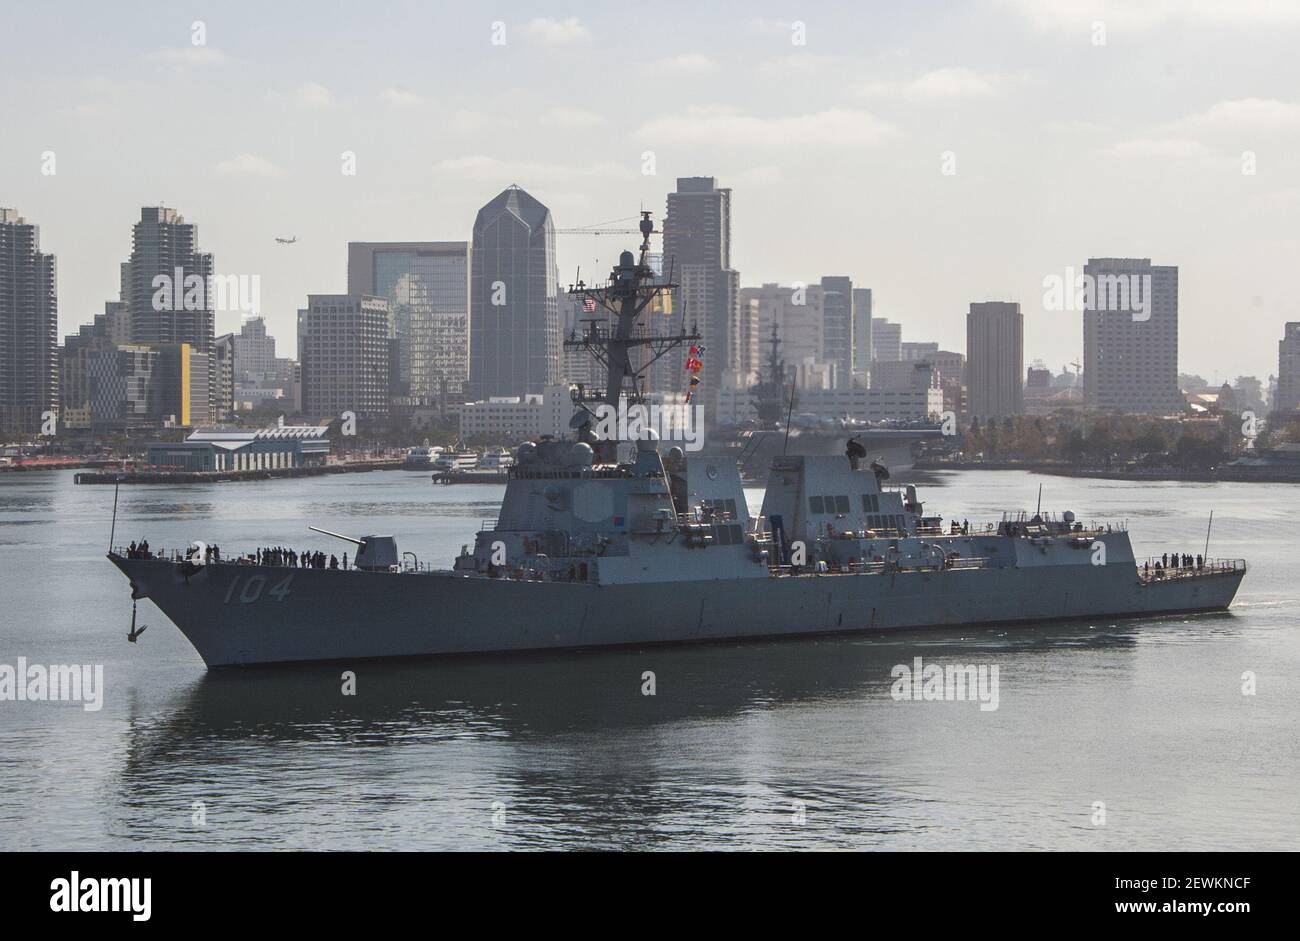 SAN DIEGO (Sep. 6, 2016) â€“ The guided missile destroyer USS Sterett (DDG 104) departs for sea. The Sterett is homeported at Naval Base San Diego. (Photo by Mass Communication Specialist Seaman Alexander Perlman/U.S. Navy)160906-N-GP724-163   Please note: Fees charged by the agency are for the agency’s services only, and do not, nor are they intended to, convey to the user any ownership of Copyright or License in the material. The agency does not claim any ownership including but not limited to Copyright or License in the attached material. By publishing this material you expressly agree to i Stock Photo